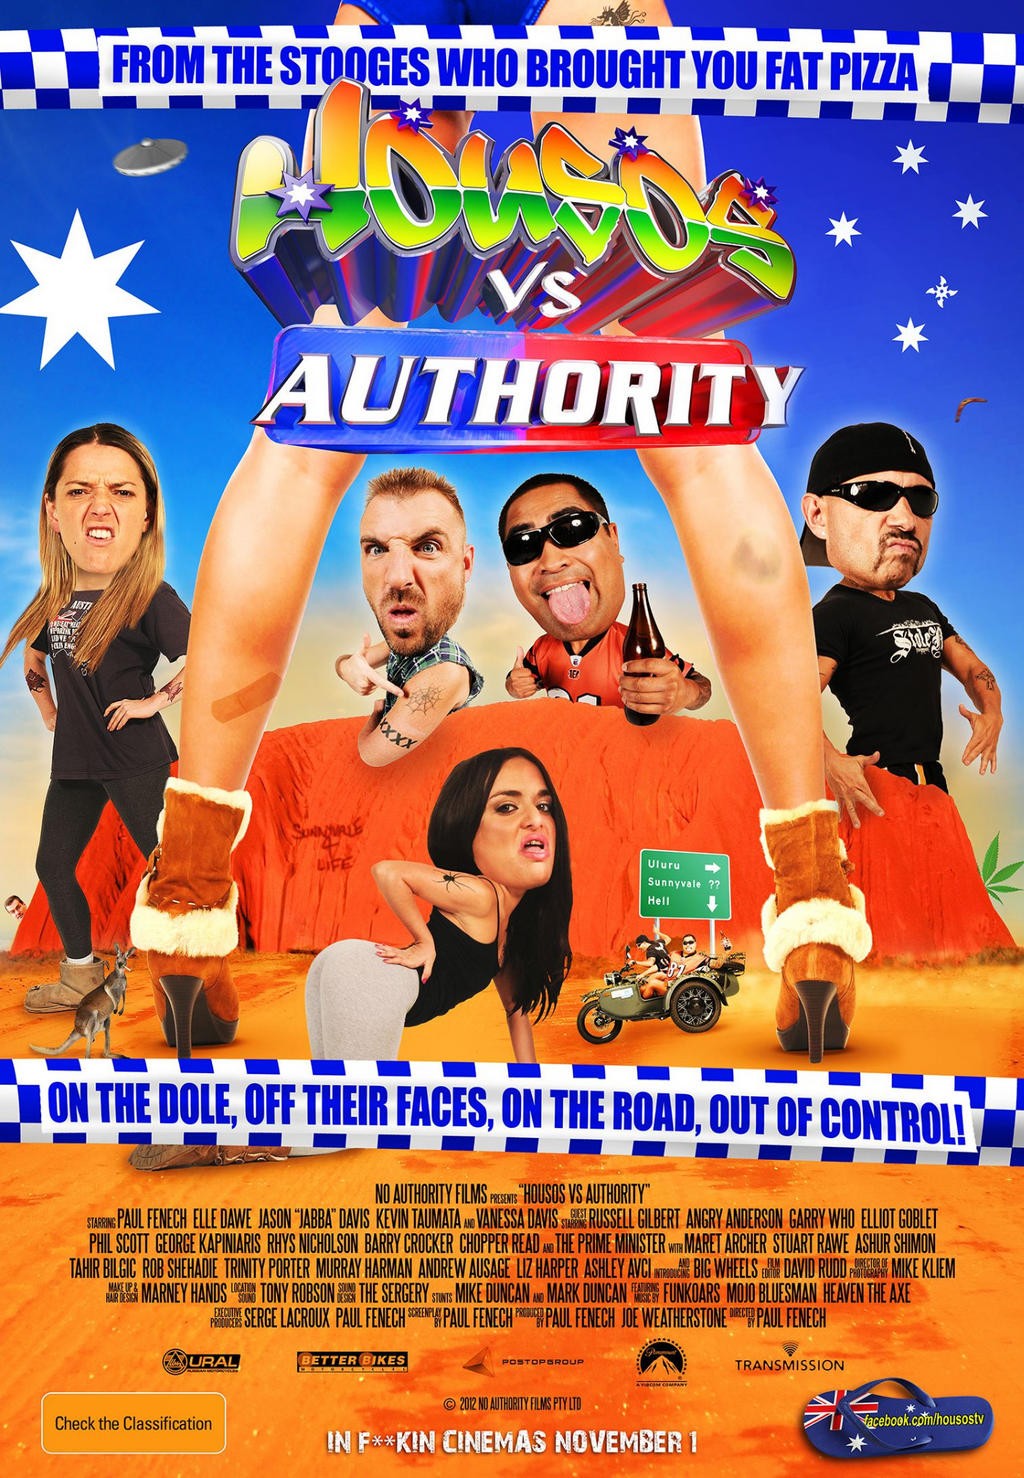 Extra Large Movie Poster Image for Housos vs. Authority 